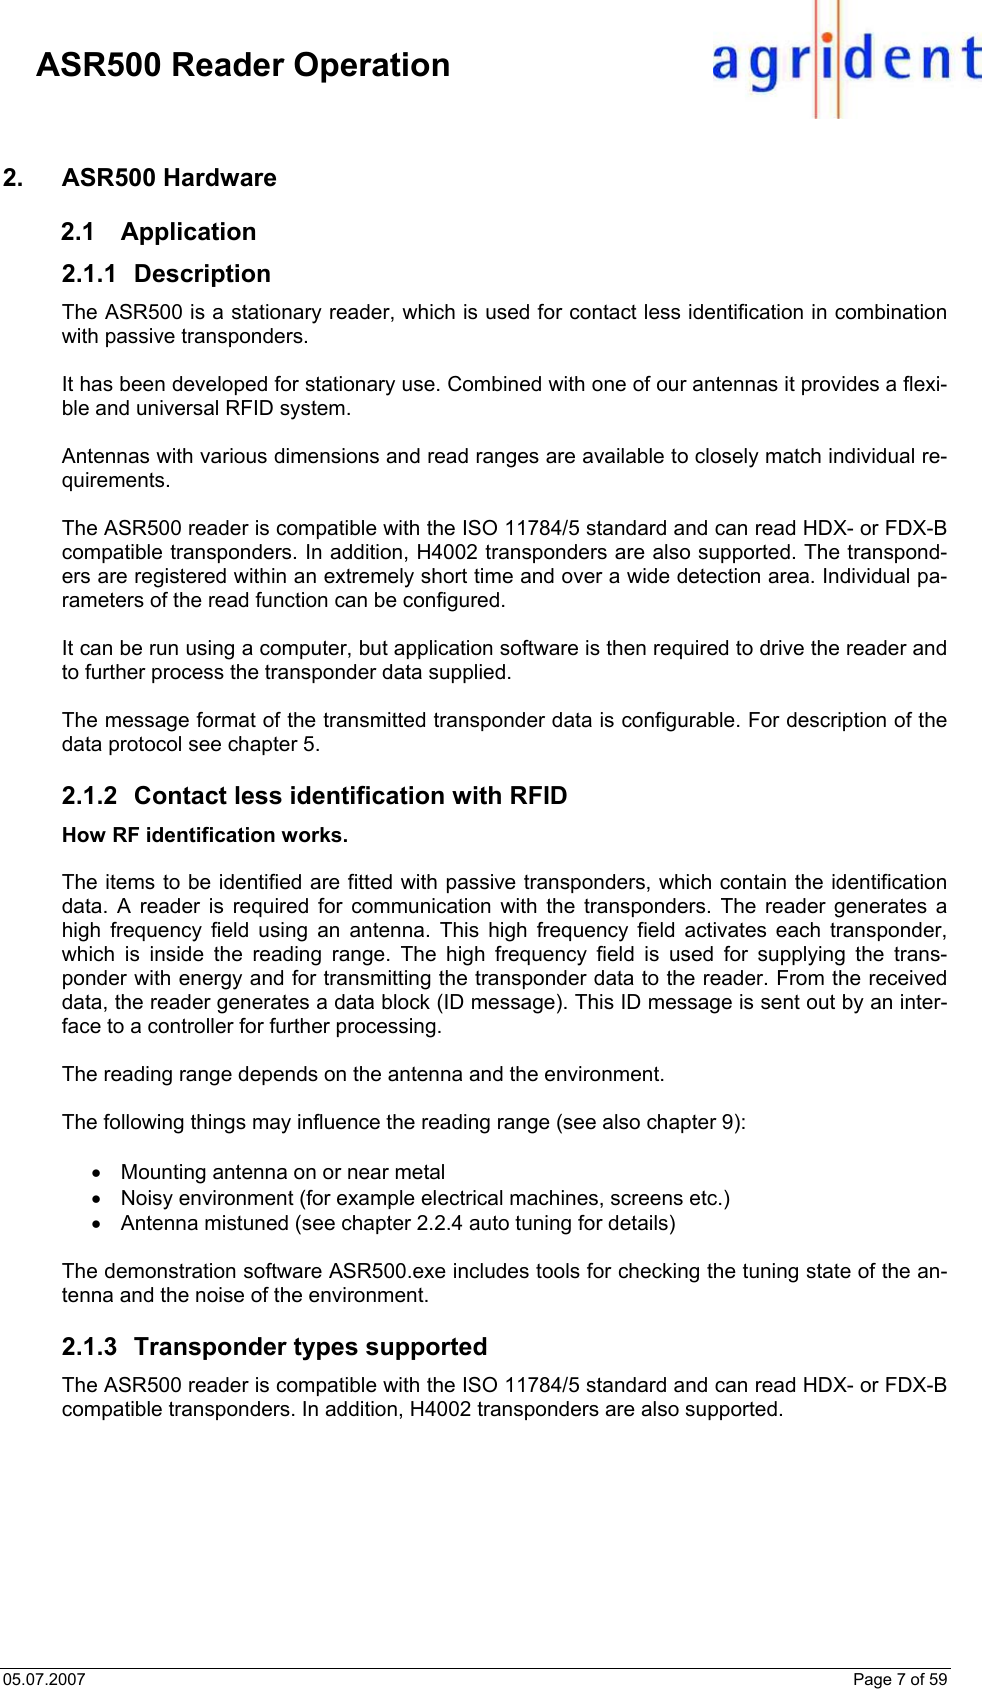 05.07.2007    Page 7 of 59     ASR500 Reader Operation 2. ASR500 Hardware 2.1 Application 2.1.1 Description The ASR500 is a stationary reader, which is used for contact less identification in combination with passive transponders.  It has been developed for stationary use. Combined with one of our antennas it provides a flexi-ble and universal RFID system.  Antennas with various dimensions and read ranges are available to closely match individual re-quirements.   The ASR500 reader is compatible with the ISO 11784/5 standard and can read HDX- or FDX-B compatible transponders. In addition, H4002 transponders are also supported. The transpond-ers are registered within an extremely short time and over a wide detection area. Individual pa-rameters of the read function can be configured.  It can be run using a computer, but application software is then required to drive the reader and to further process the transponder data supplied.  The message format of the transmitted transponder data is configurable. For description of the data protocol see chapter 5.  2.1.2  Contact less identification with RFID How RF identification works.  The items to be identified are fitted with passive transponders, which contain the identification data. A reader is required for communication with the transponders. The reader generates a high frequency field using an antenna. This high frequency field activates each transponder, which is inside the reading range. The high frequency field is used for supplying the trans-ponder with energy and for transmitting the transponder data to the reader. From the received data, the reader generates a data block (ID message). This ID message is sent out by an inter-face to a controller for further processing.  The reading range depends on the antenna and the environment.  The following things may influence the reading range (see also chapter 9):  •  Mounting antenna on or near metal •  Noisy environment (for example electrical machines, screens etc.) •  Antenna mistuned (see chapter 2.2.4 auto tuning for details)  The demonstration software ASR500.exe includes tools for checking the tuning state of the an-tenna and the noise of the environment.  2.1.3  Transponder types supported The ASR500 reader is compatible with the ISO 11784/5 standard and can read HDX- or FDX-B compatible transponders. In addition, H4002 transponders are also supported.    